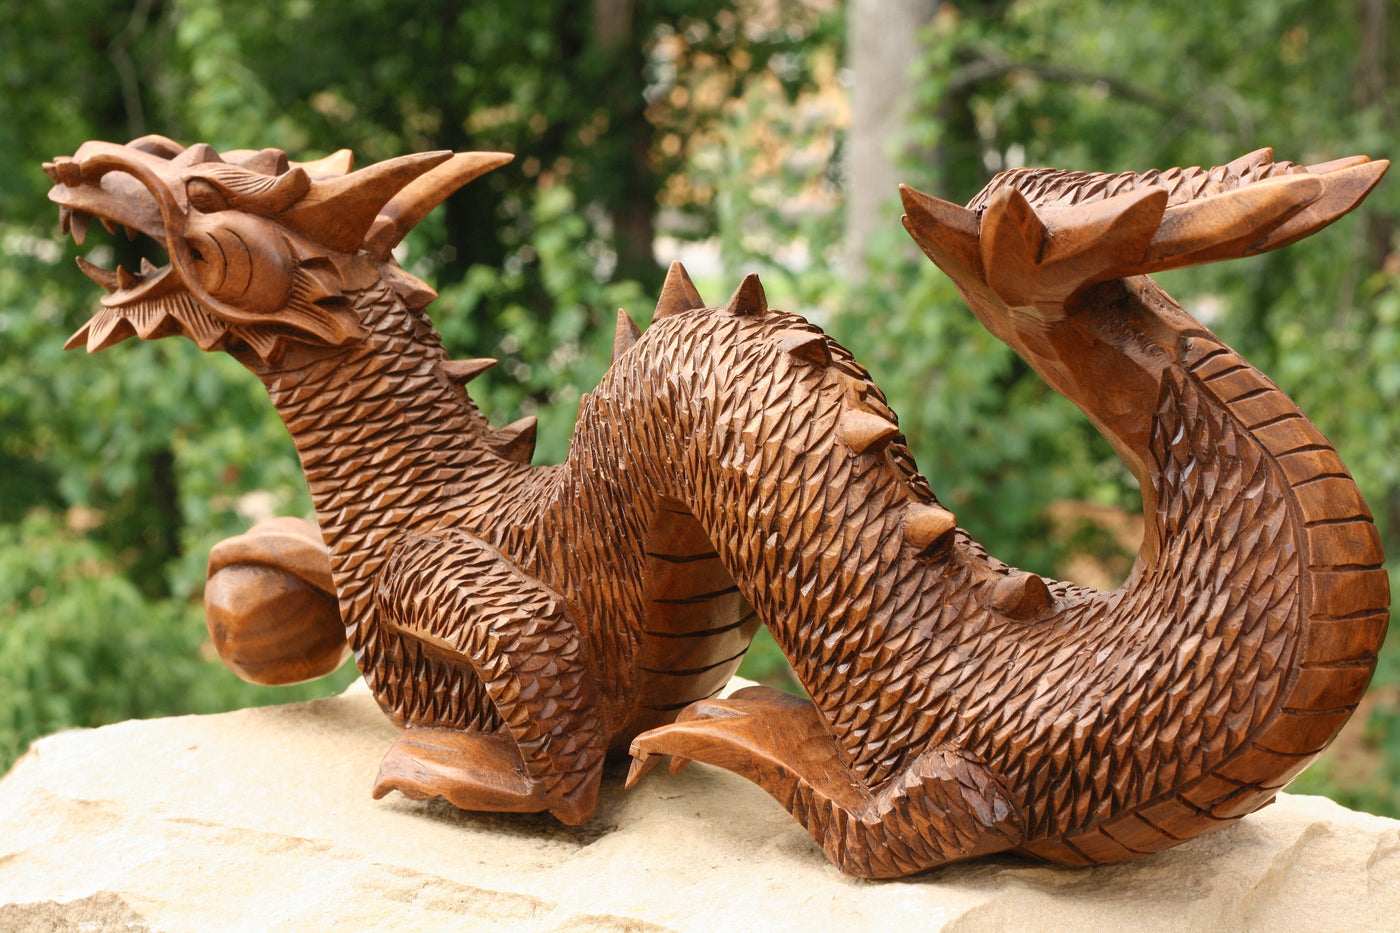 Wooden Crawling Dragon Handmade Sculpture Statue Handcrafted Gift Art Decorative Home Decor Figurine Accent Decoration Artwork Hand Carved